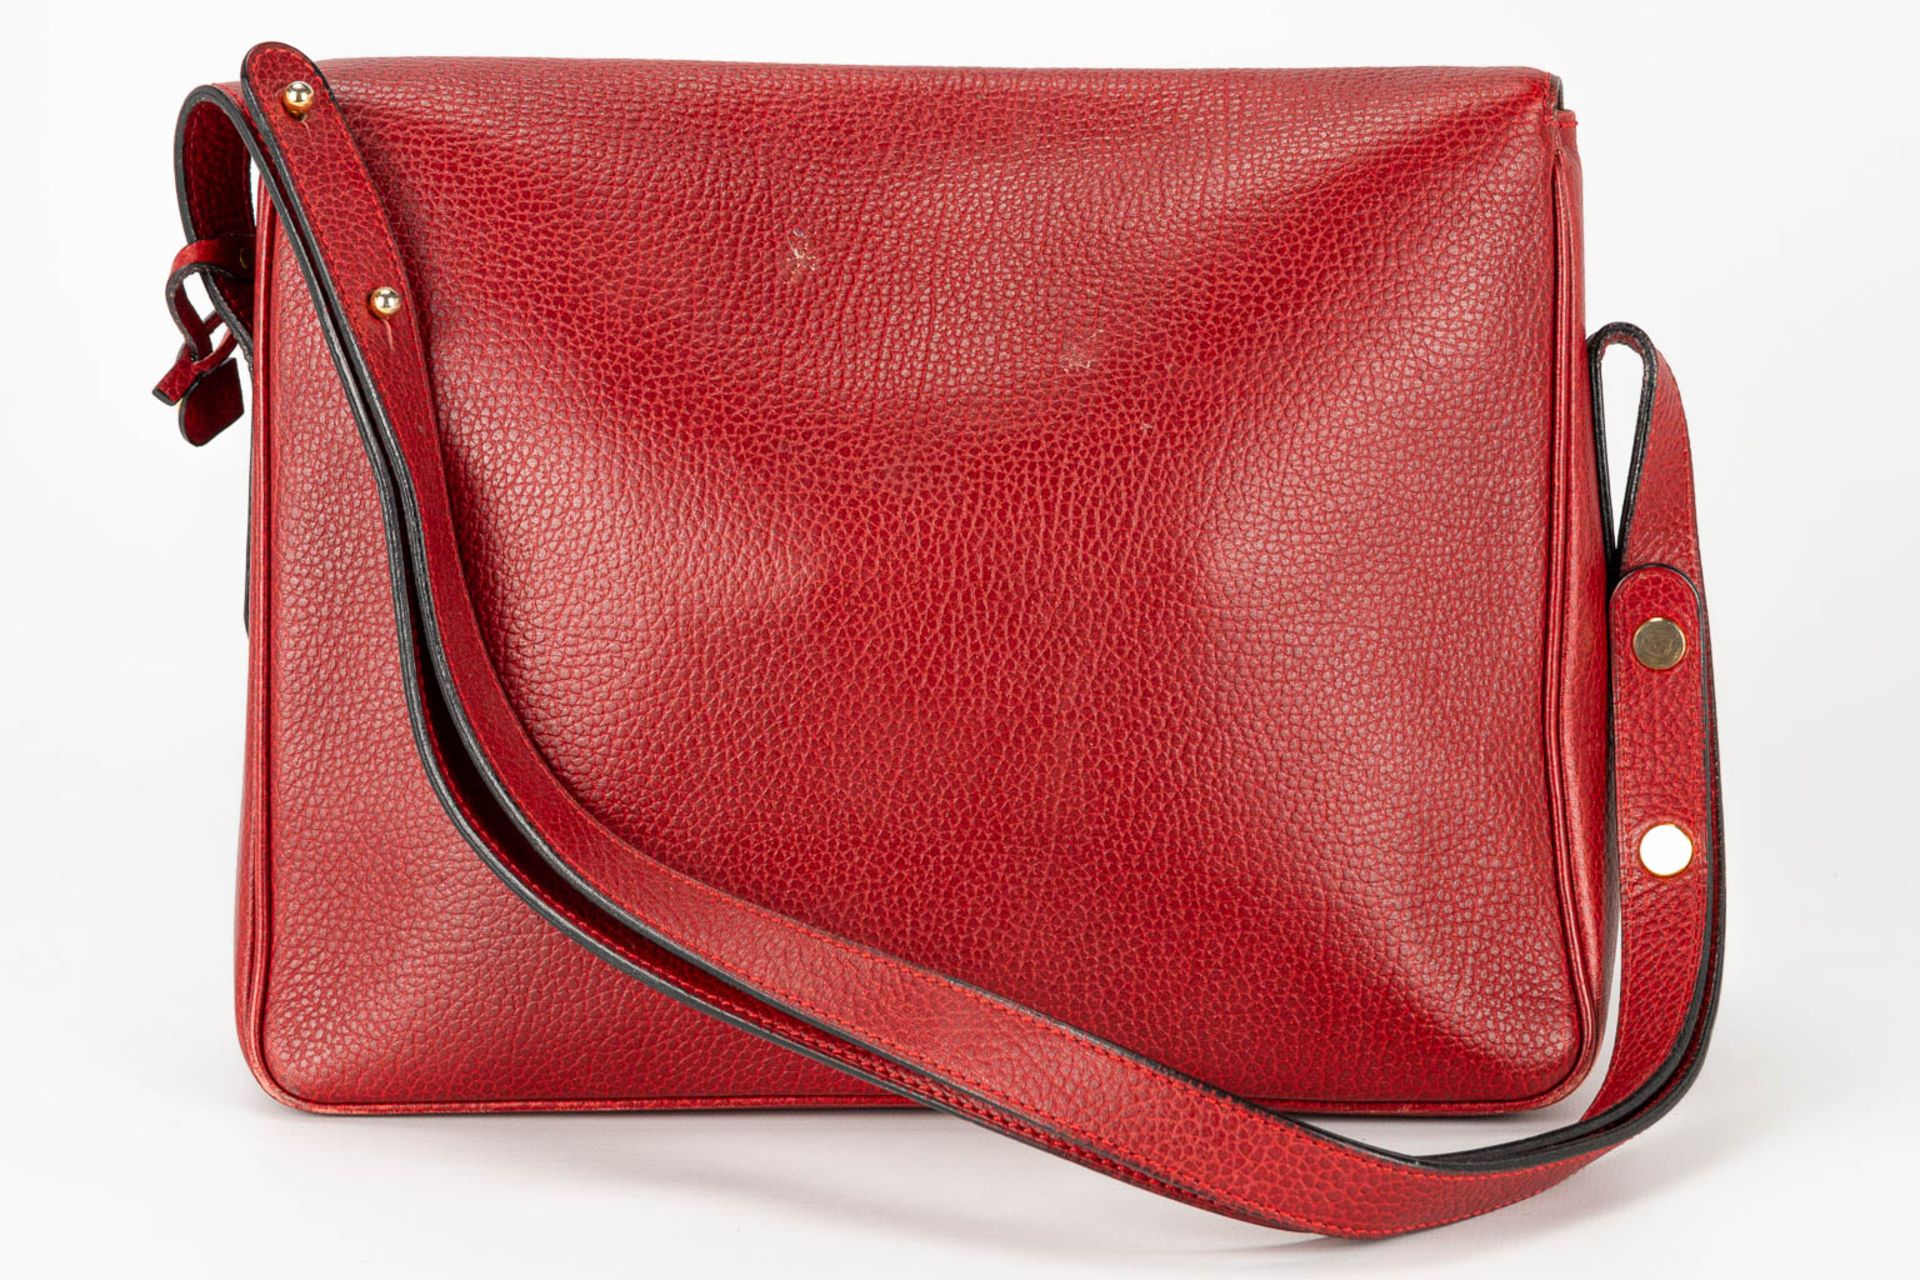 A purse made of red leather and marked Delvaux. - Image 14 of 16